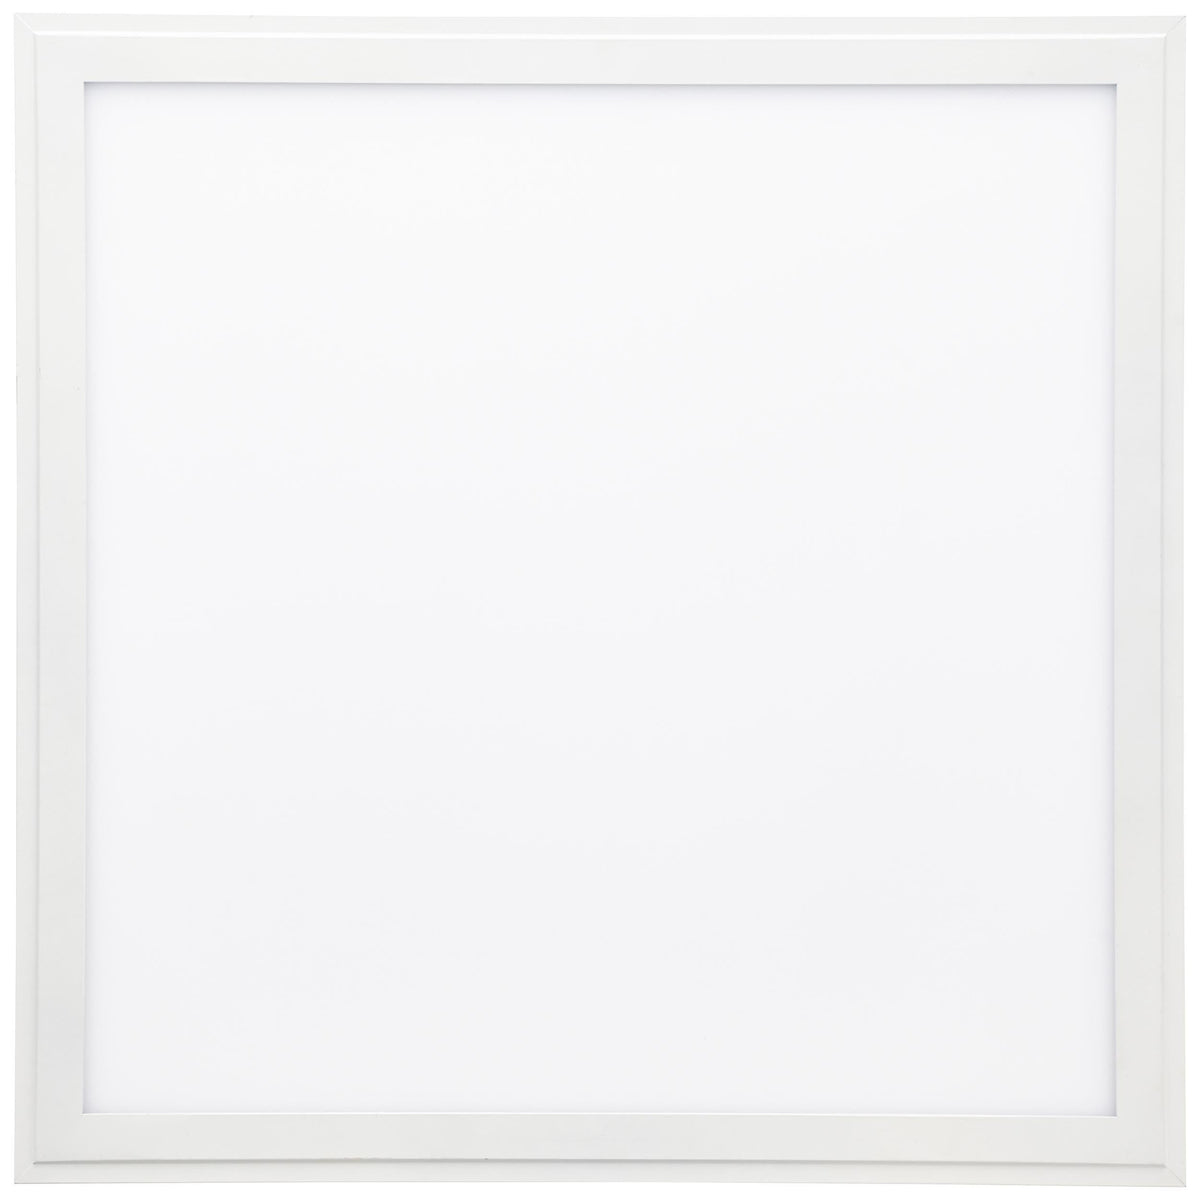 Brilliant 1 Light 24W Abie LED Square Ceiling Panel - White | G90318/05 from DID Electrical - guaranteed Irish, guaranteed quality service. (6977602060476)